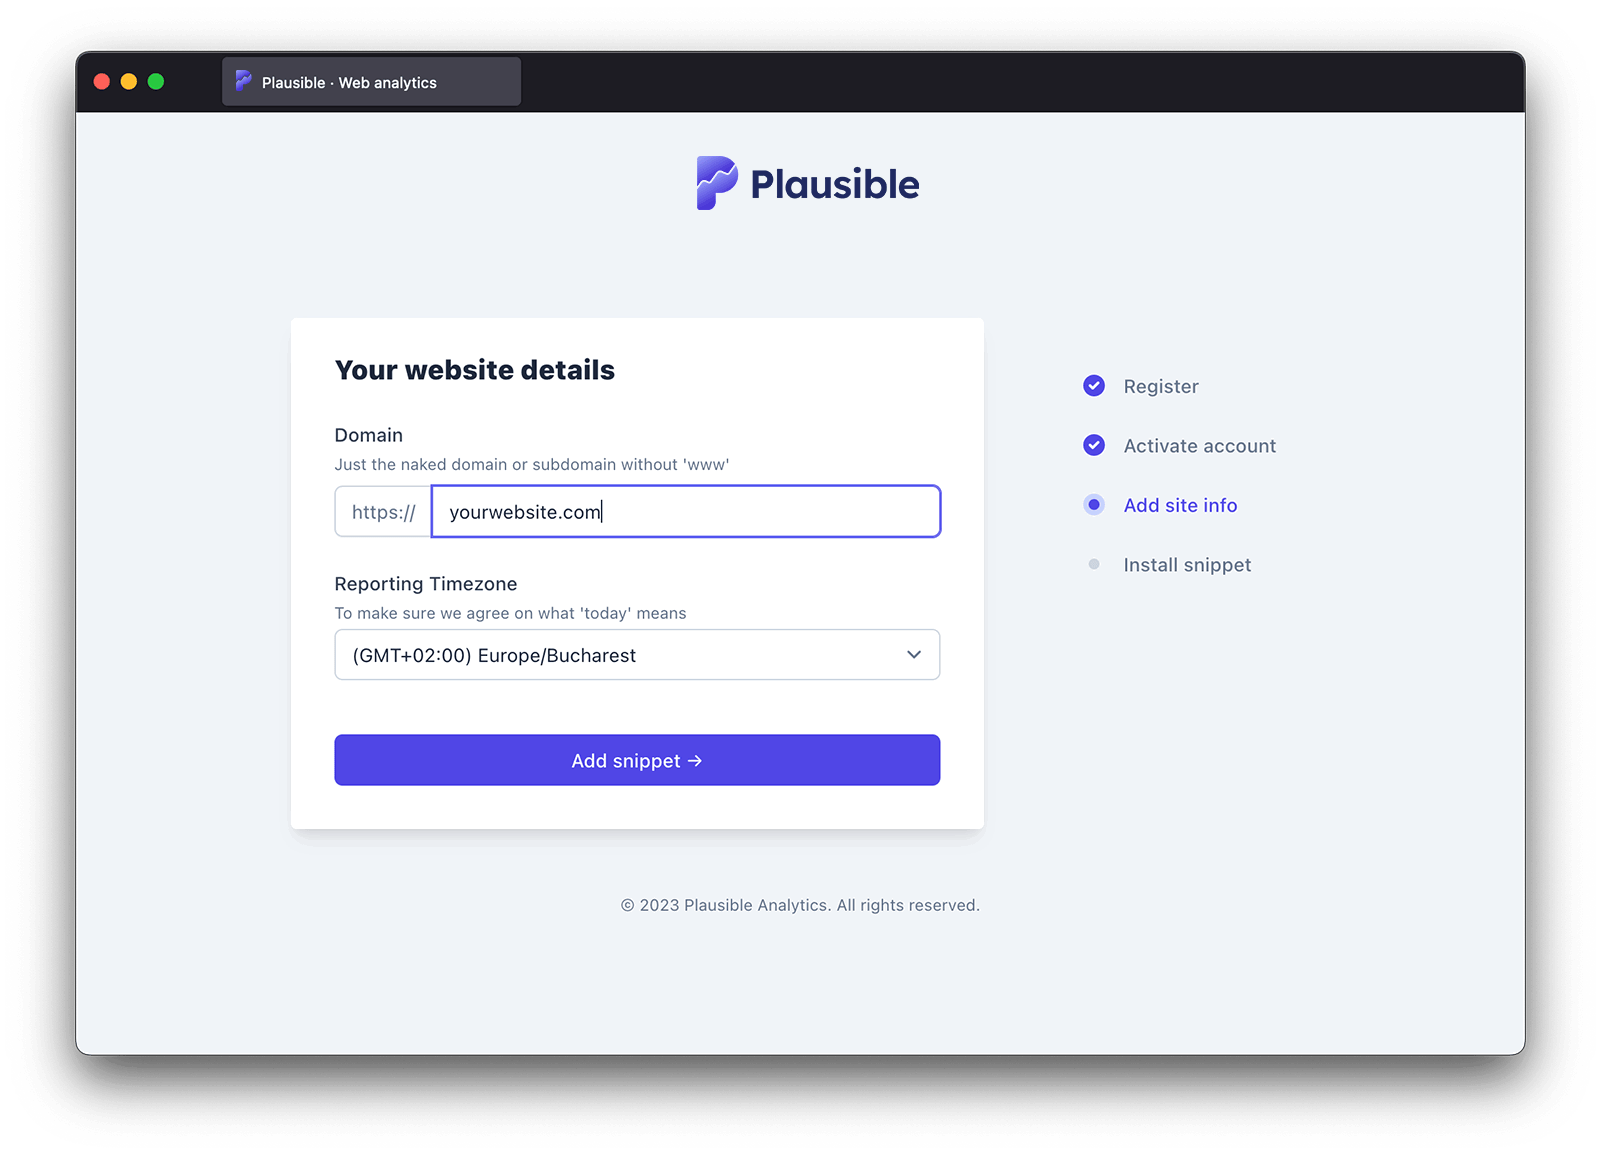 Add your website details to Plausible Analytics